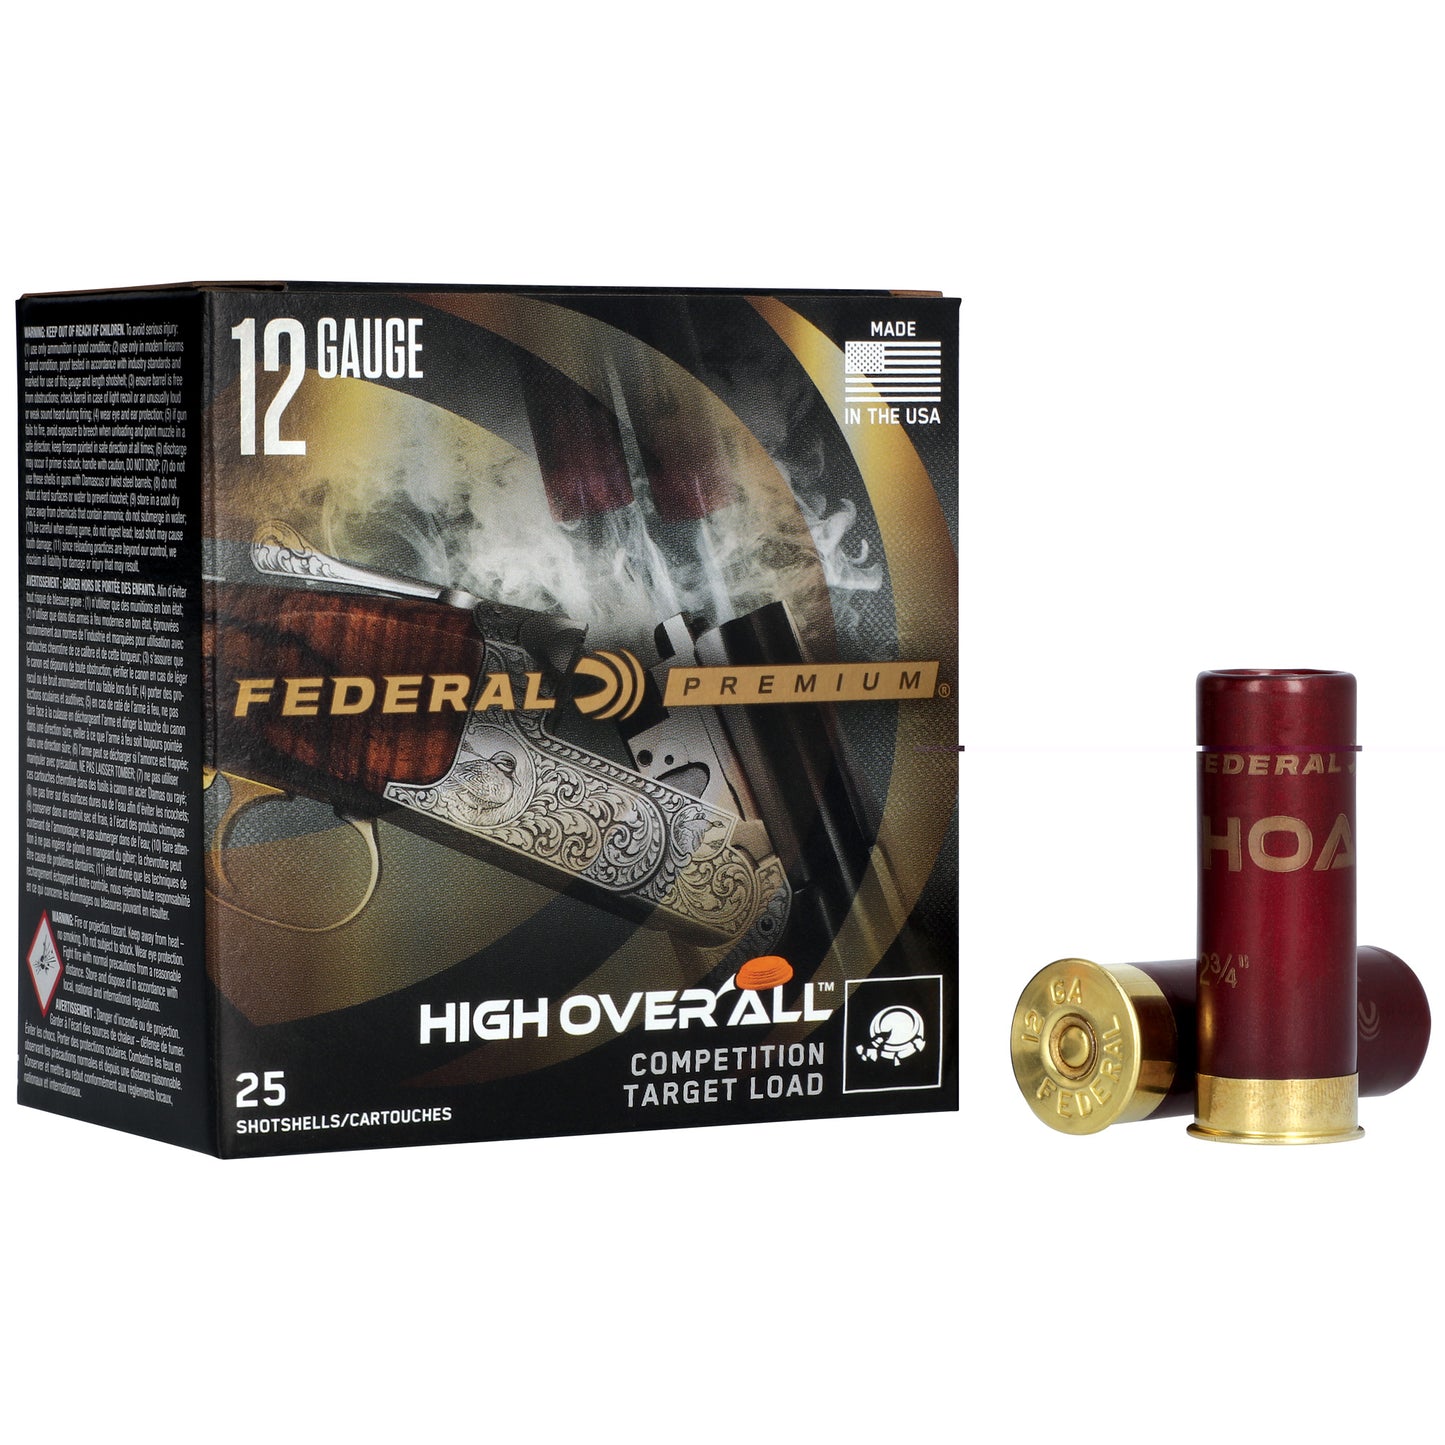 Federal, Premium, High Over All, Competition Target Load, 12 Gauge 2.75", #7.5, 3 Dram, 1 oz, Lead, 25 Round Box